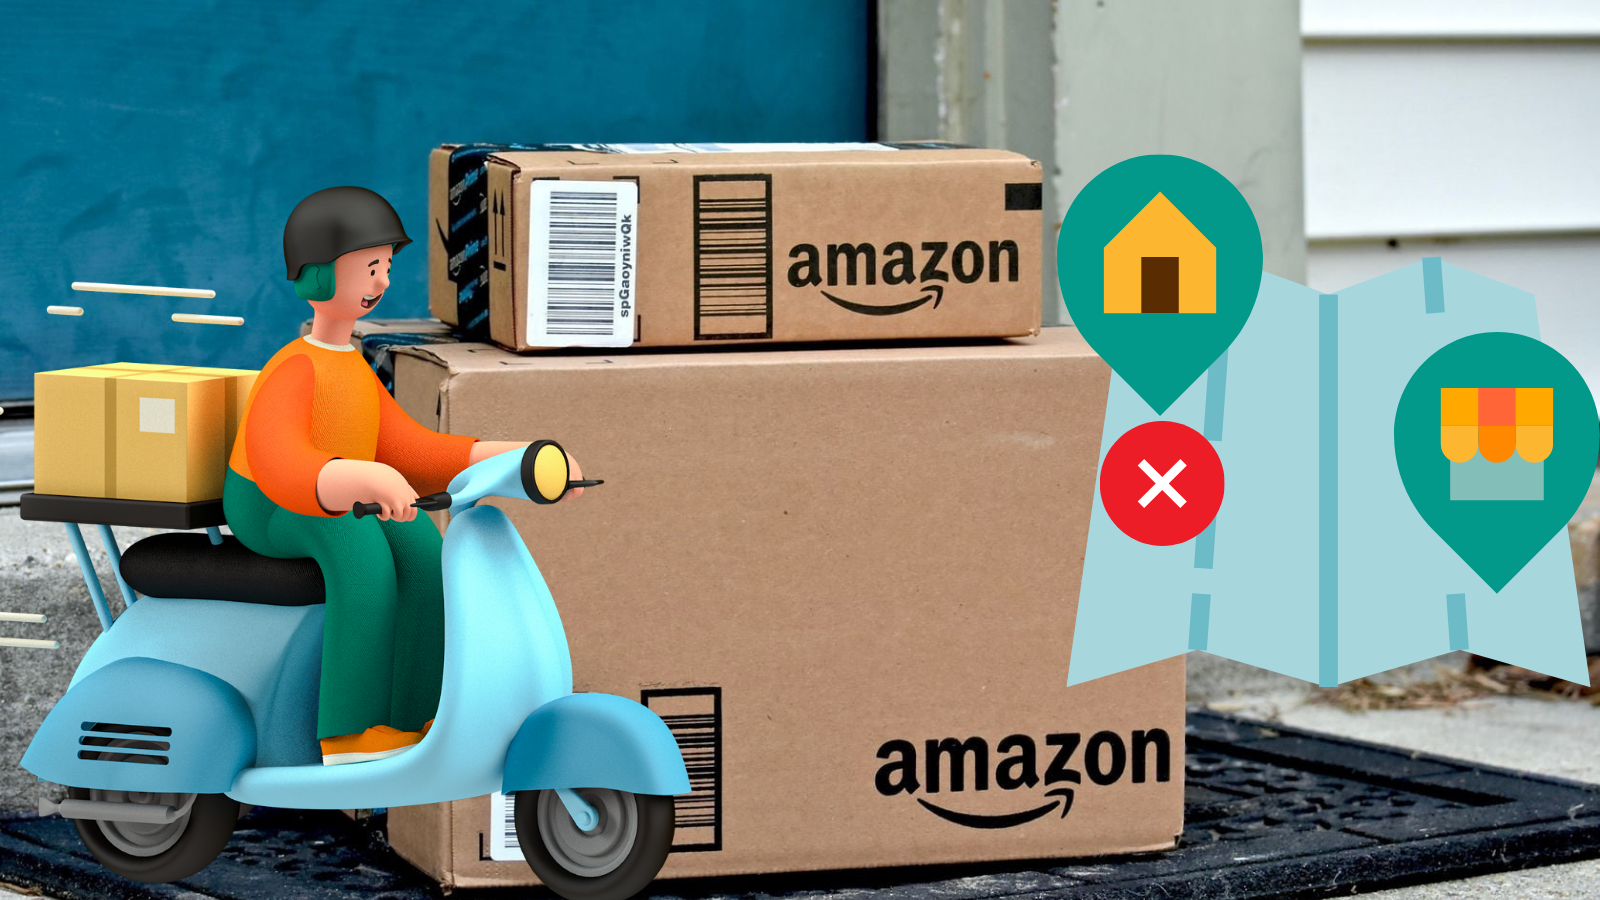 Amazon Delivered to Wrong Address (What to do + How to Refund)